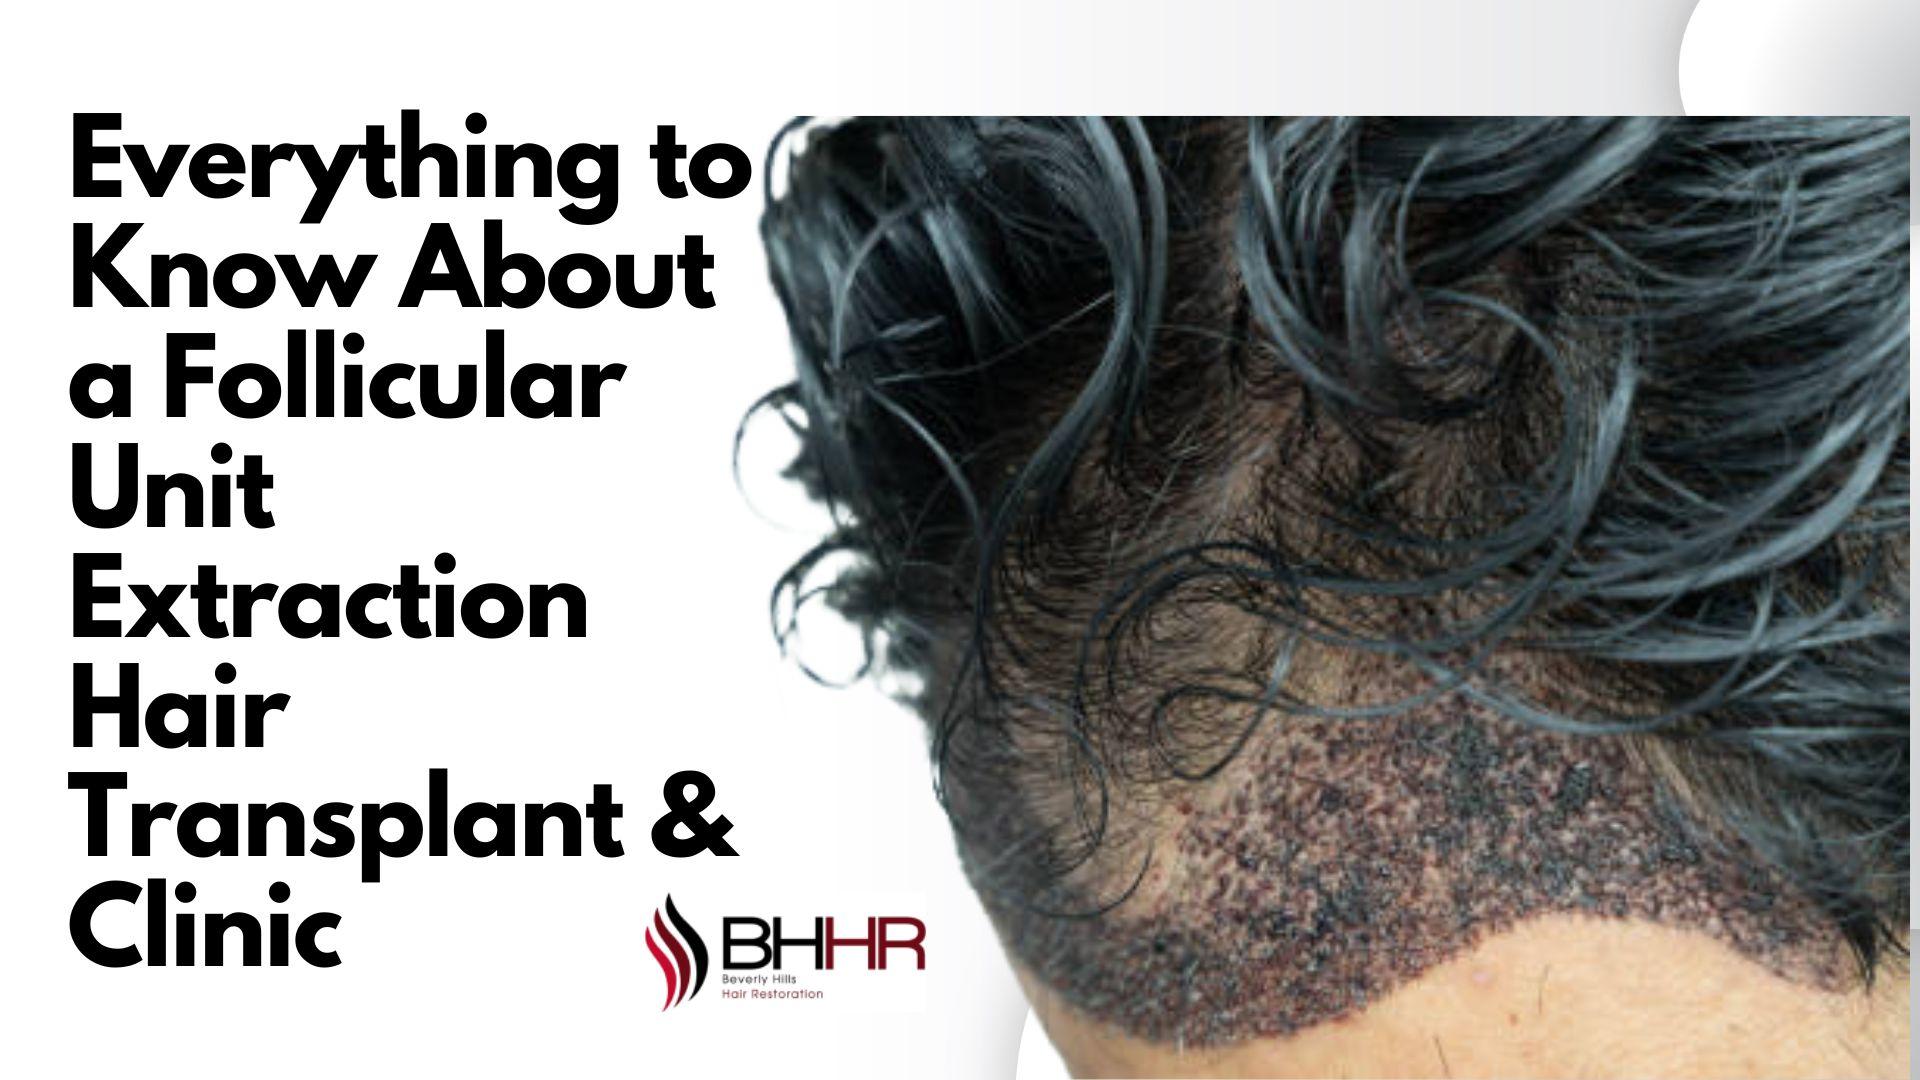 Everything to Know About a Follicular Unit Extraction Hair Transplant & Clinic